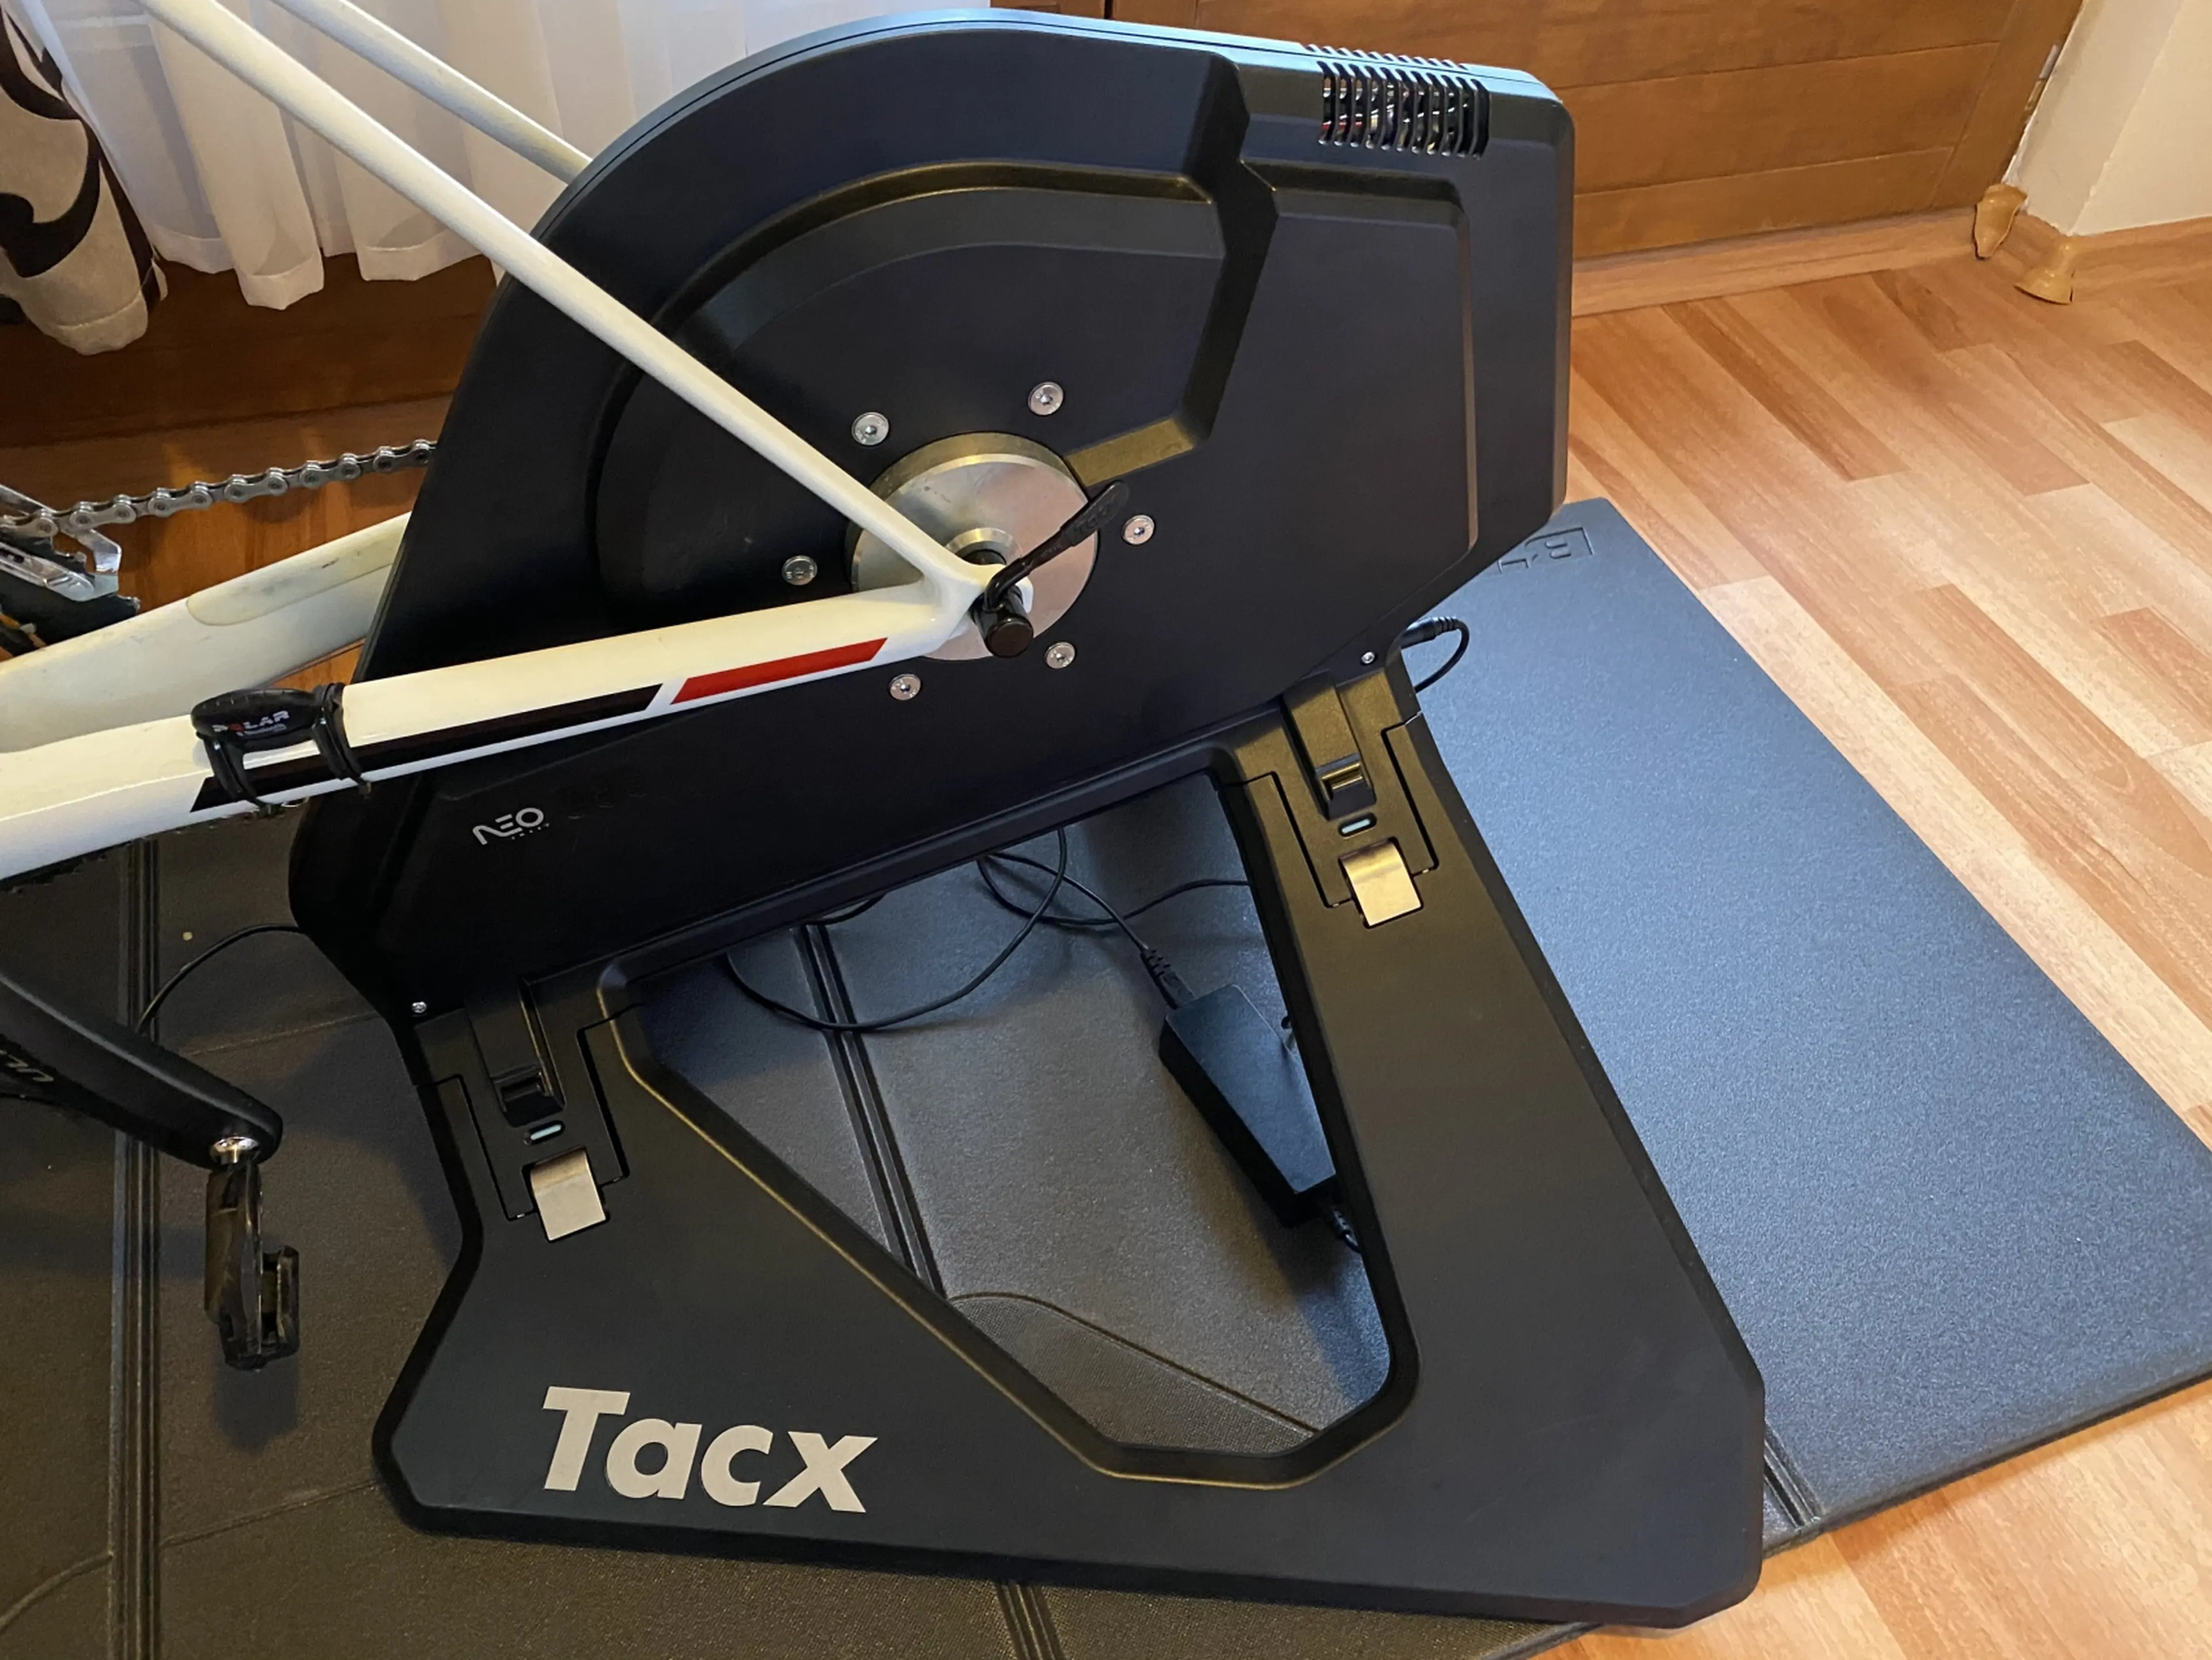 2. Home Trainer ciclism TACX NEO Smart Interactive Direct Drive T2800